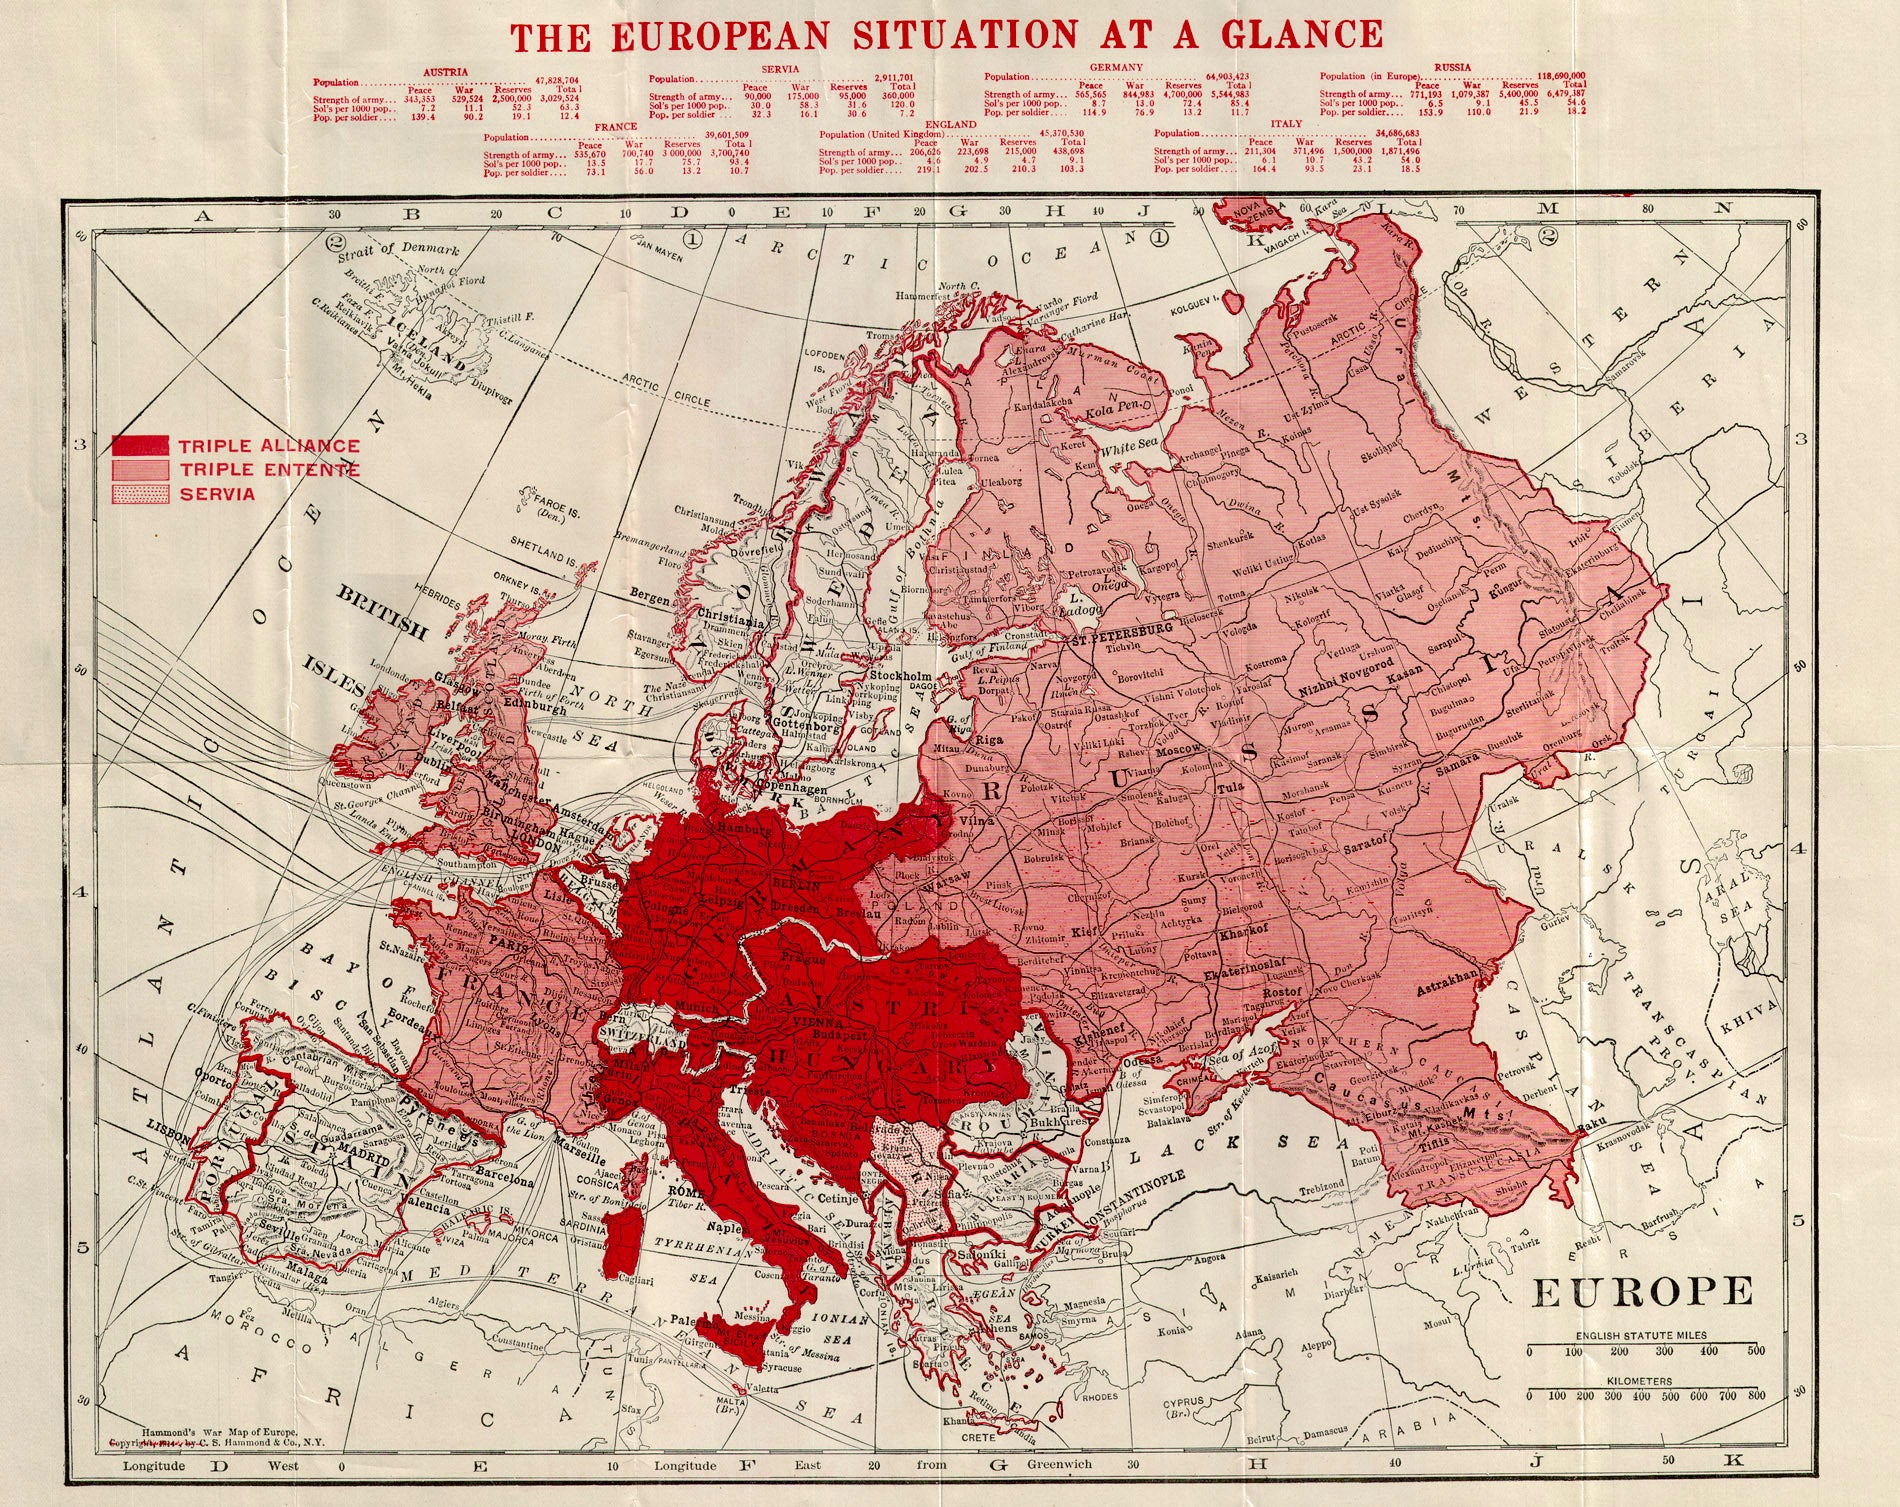 (WWI - Europe) Hammond's War Map Of Europe Showing all Countries Involved in Great Conflict of European Powers